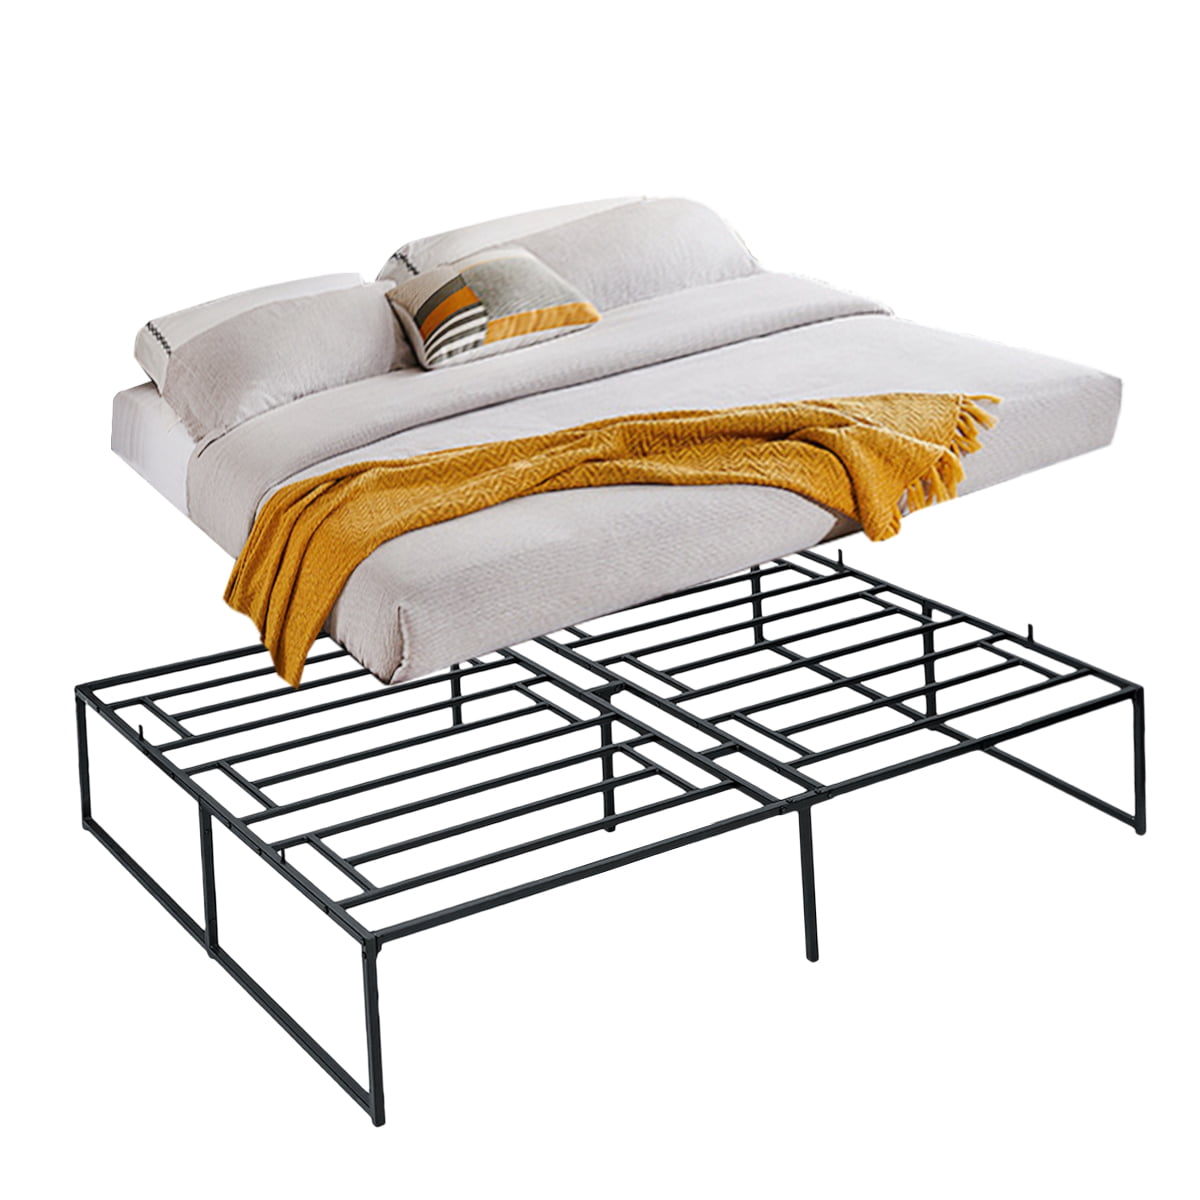 Insma 14'' Heavy Duty Metal Bed Frame with Under-bed Storage, No Box